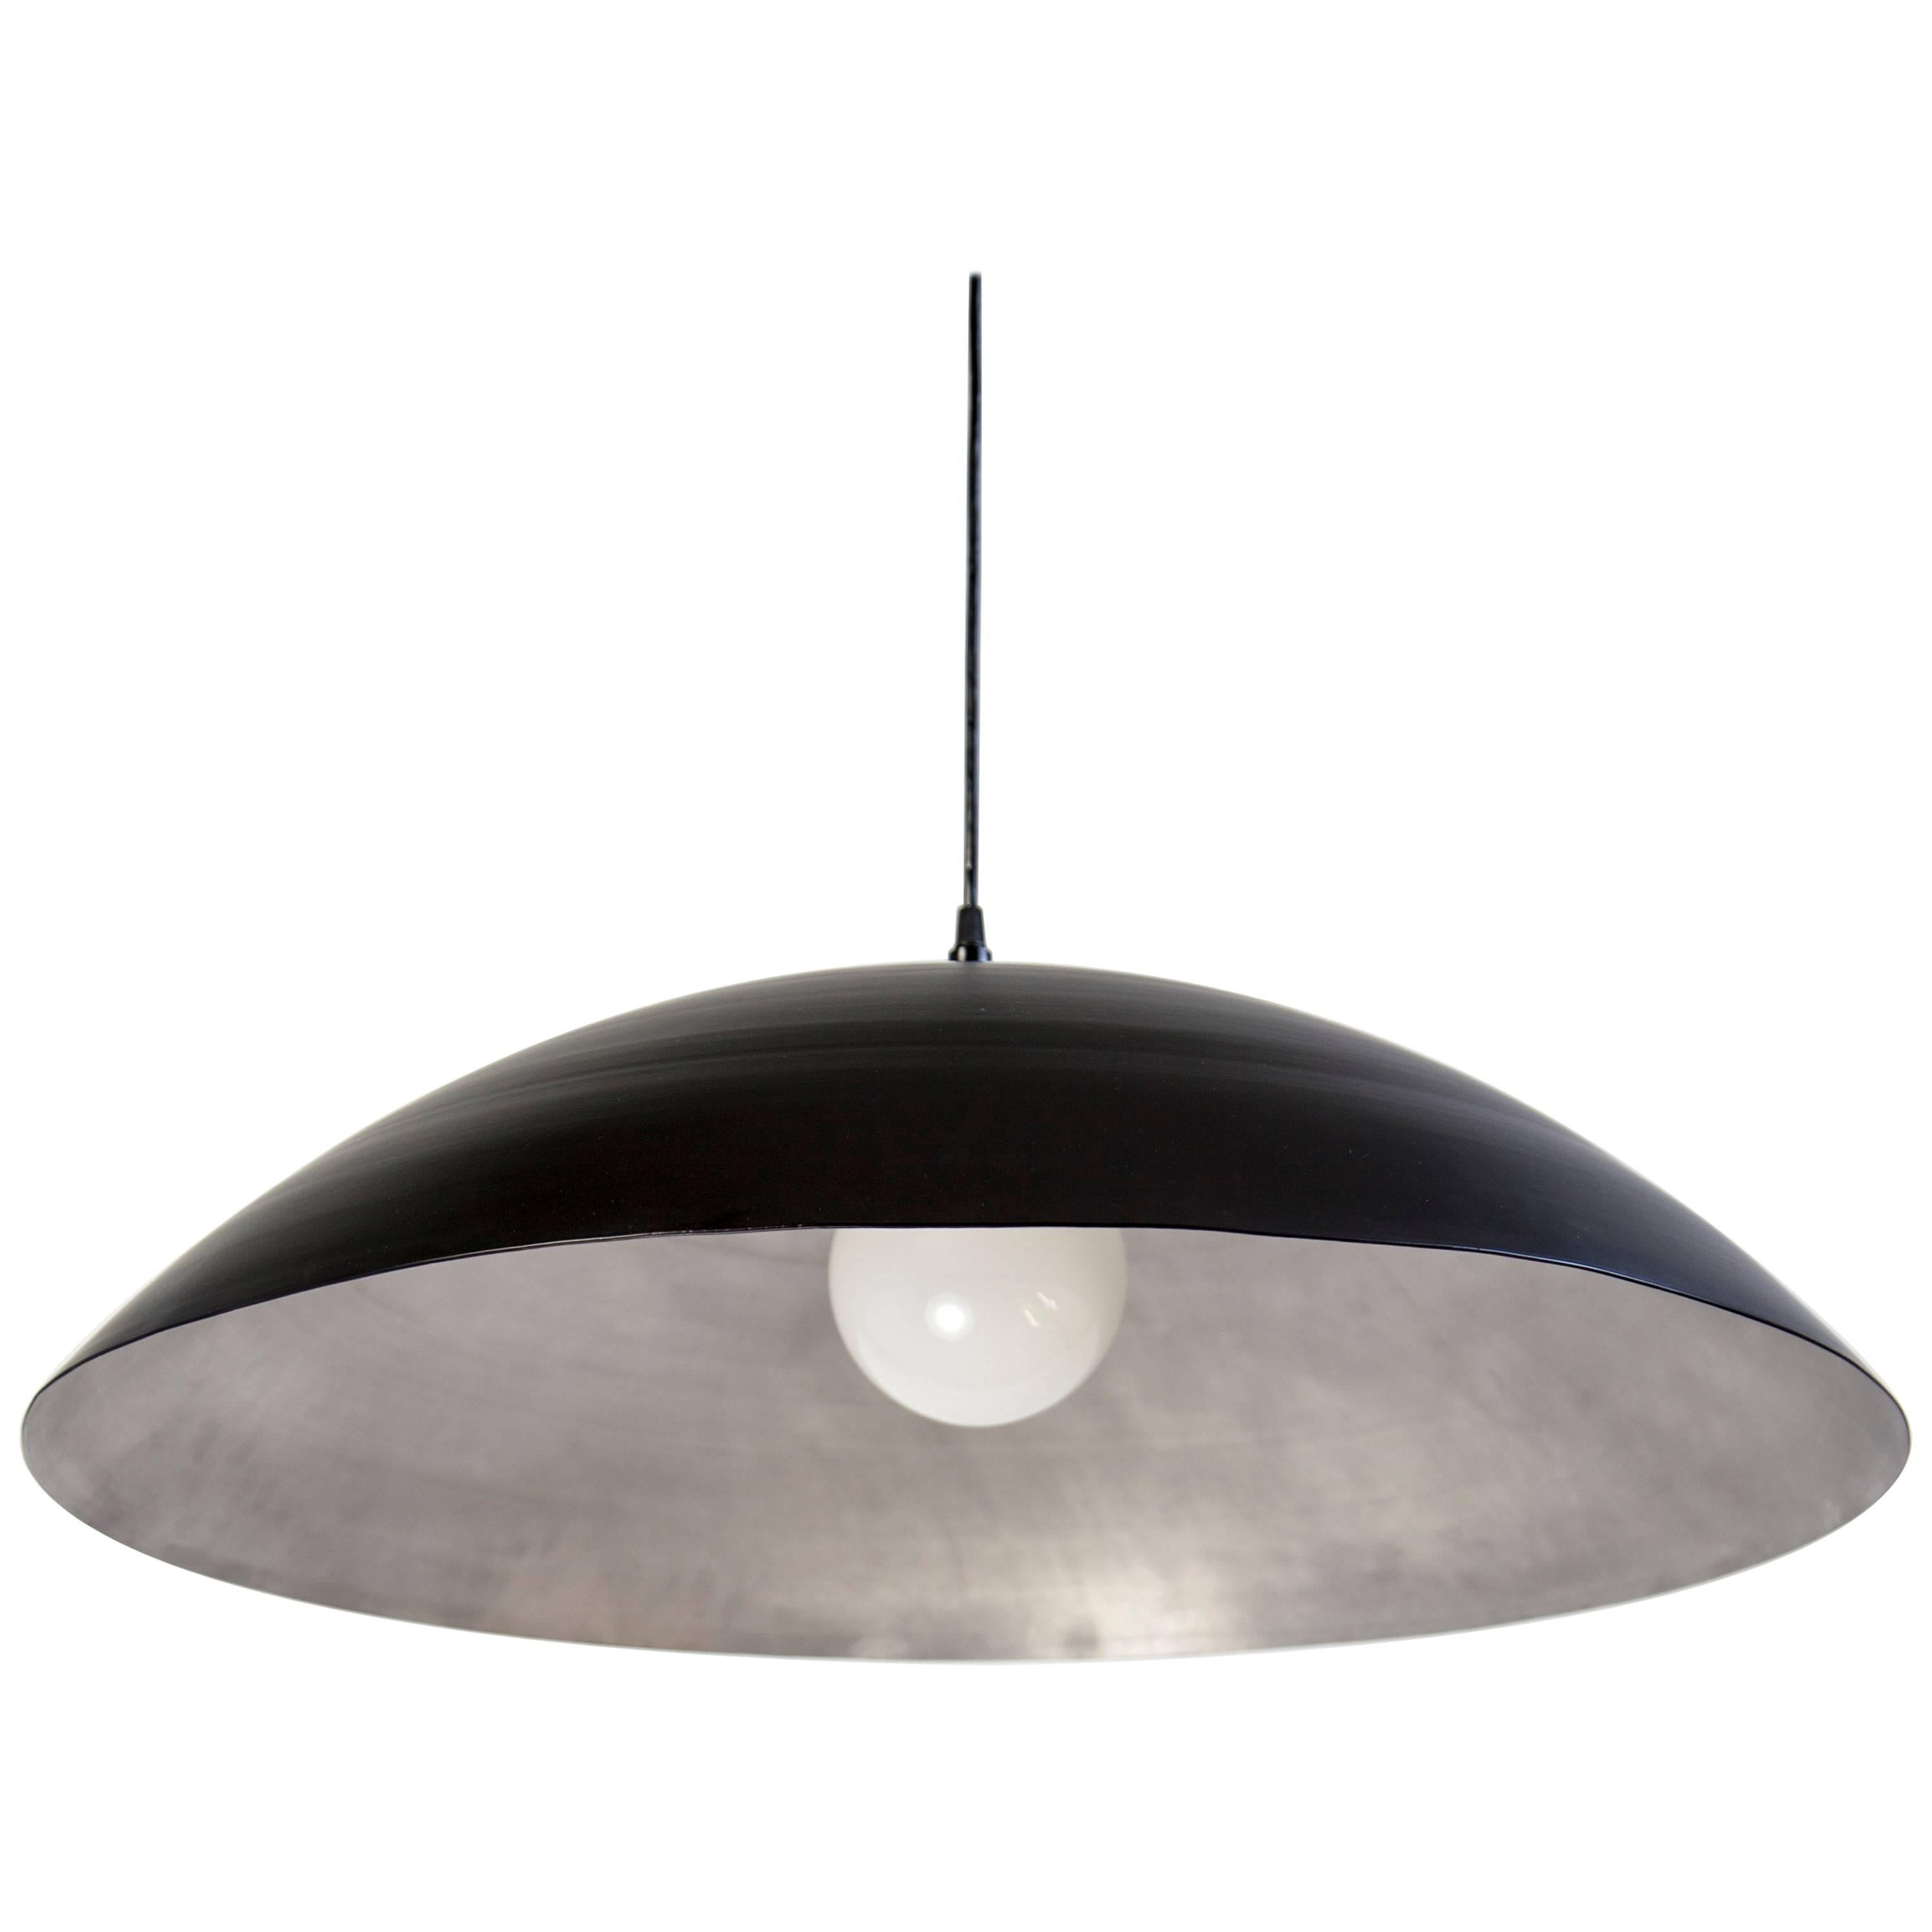 Customizable Oversized Pendant by RESEARCH Lighting, Black and Silver, MTO